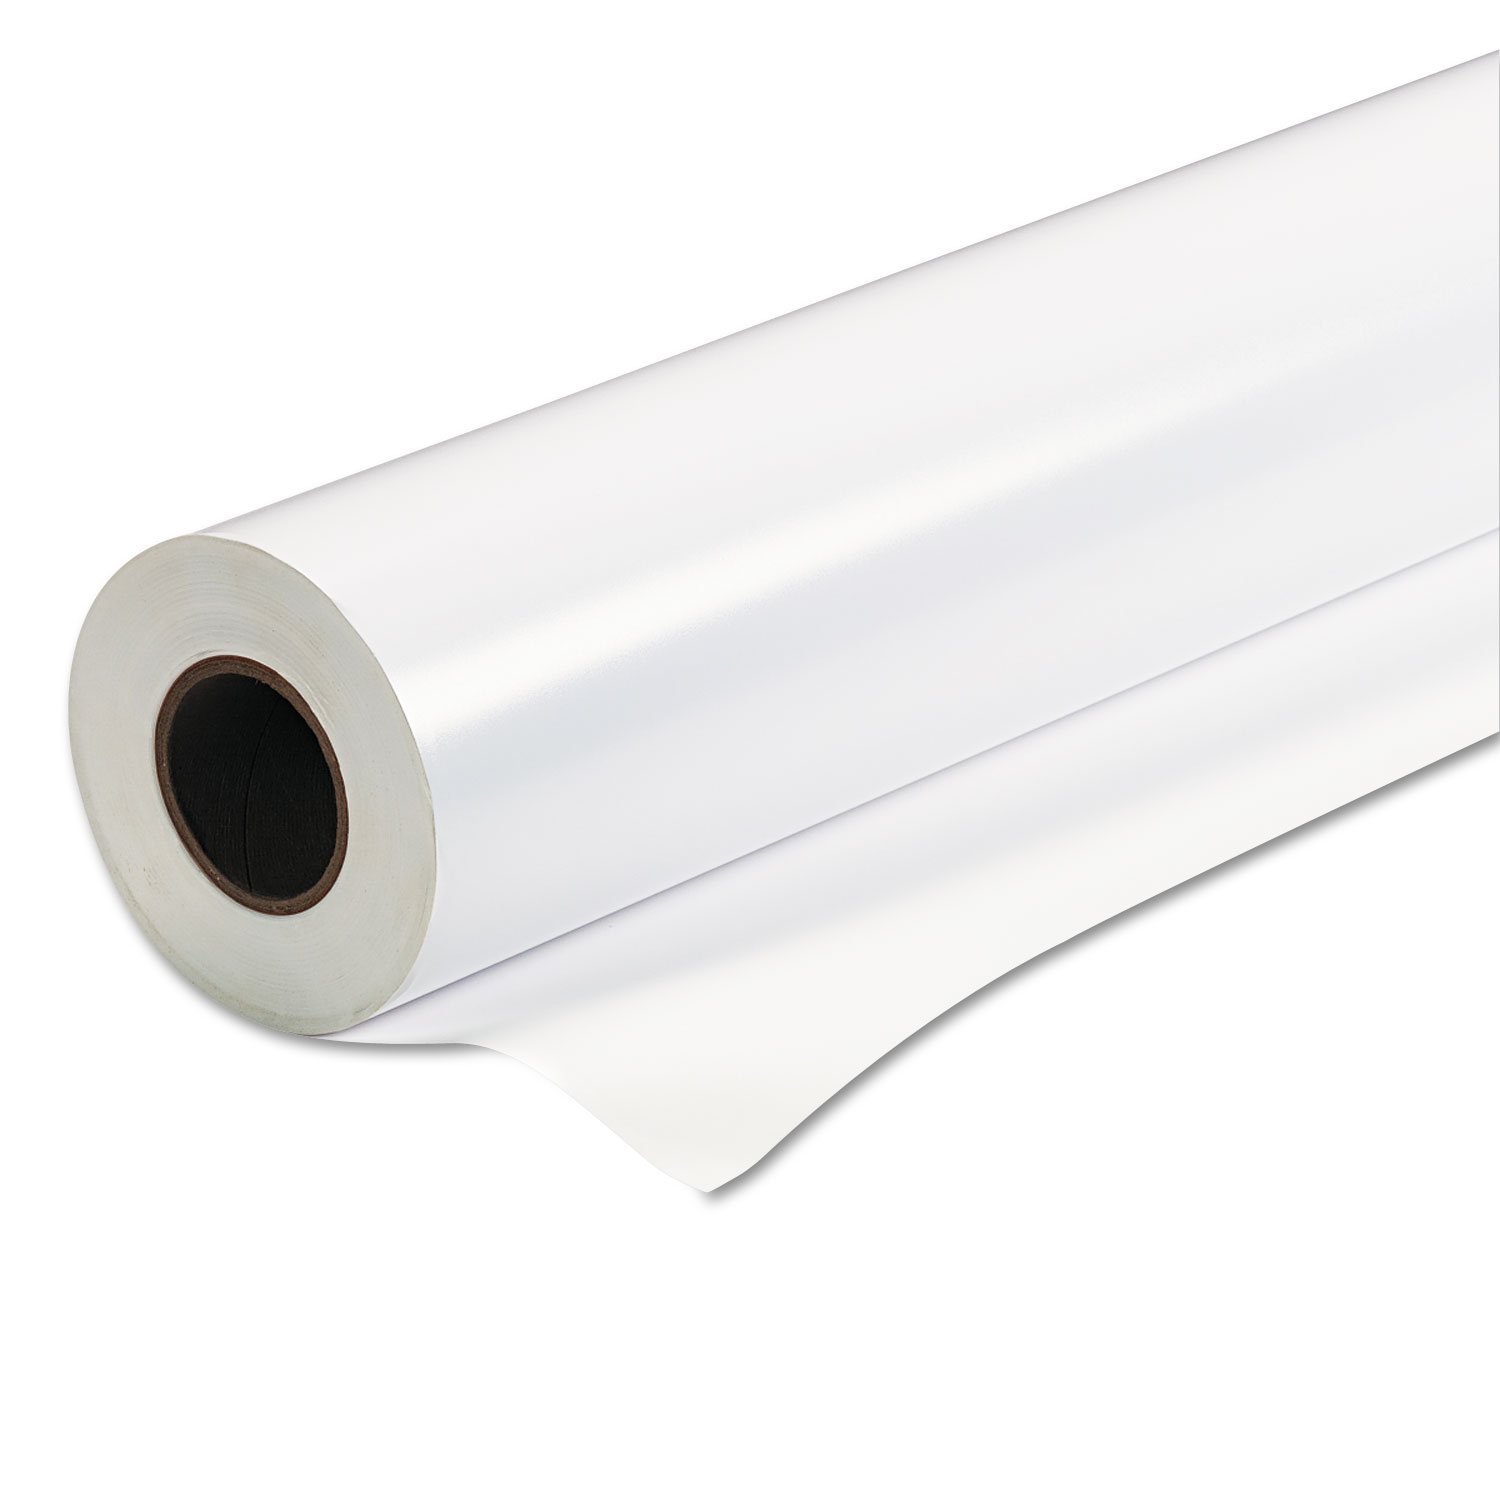 Professional Satin Photo Paper, 24 x 75 ft, Roll